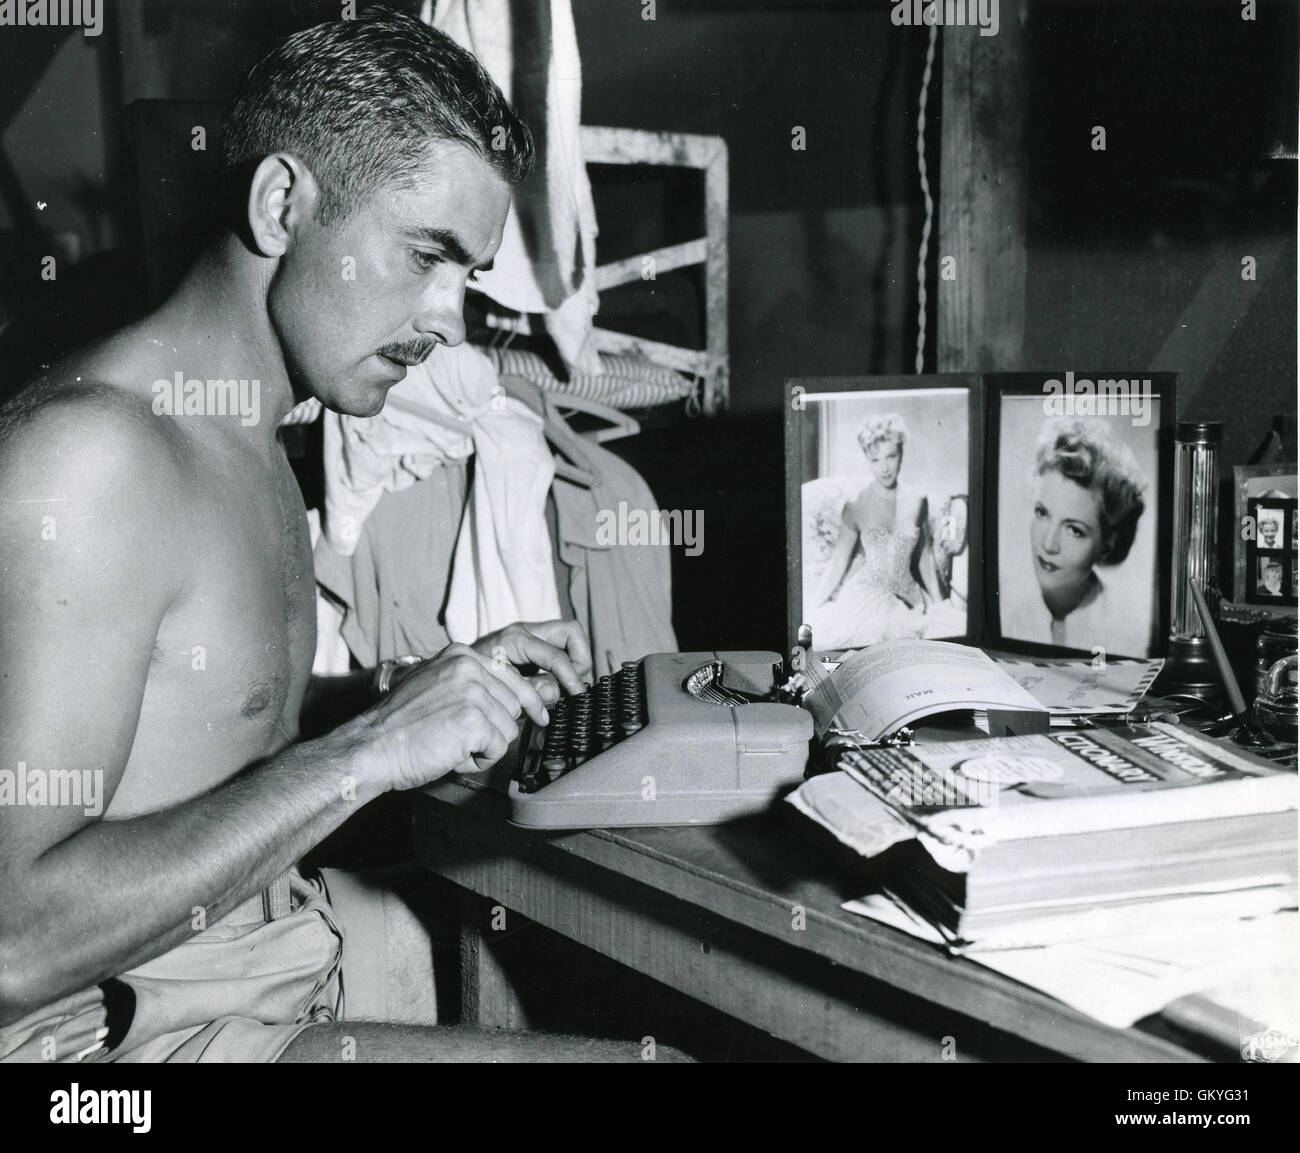 U.S. Marine 1st Lt. Tyrone Power is shown writing to his wife, Annabella, from a Marine base on Saipan, central Pacific island, when Power was serving as a transport pilot with a Marine Air Wing. Stock Photo